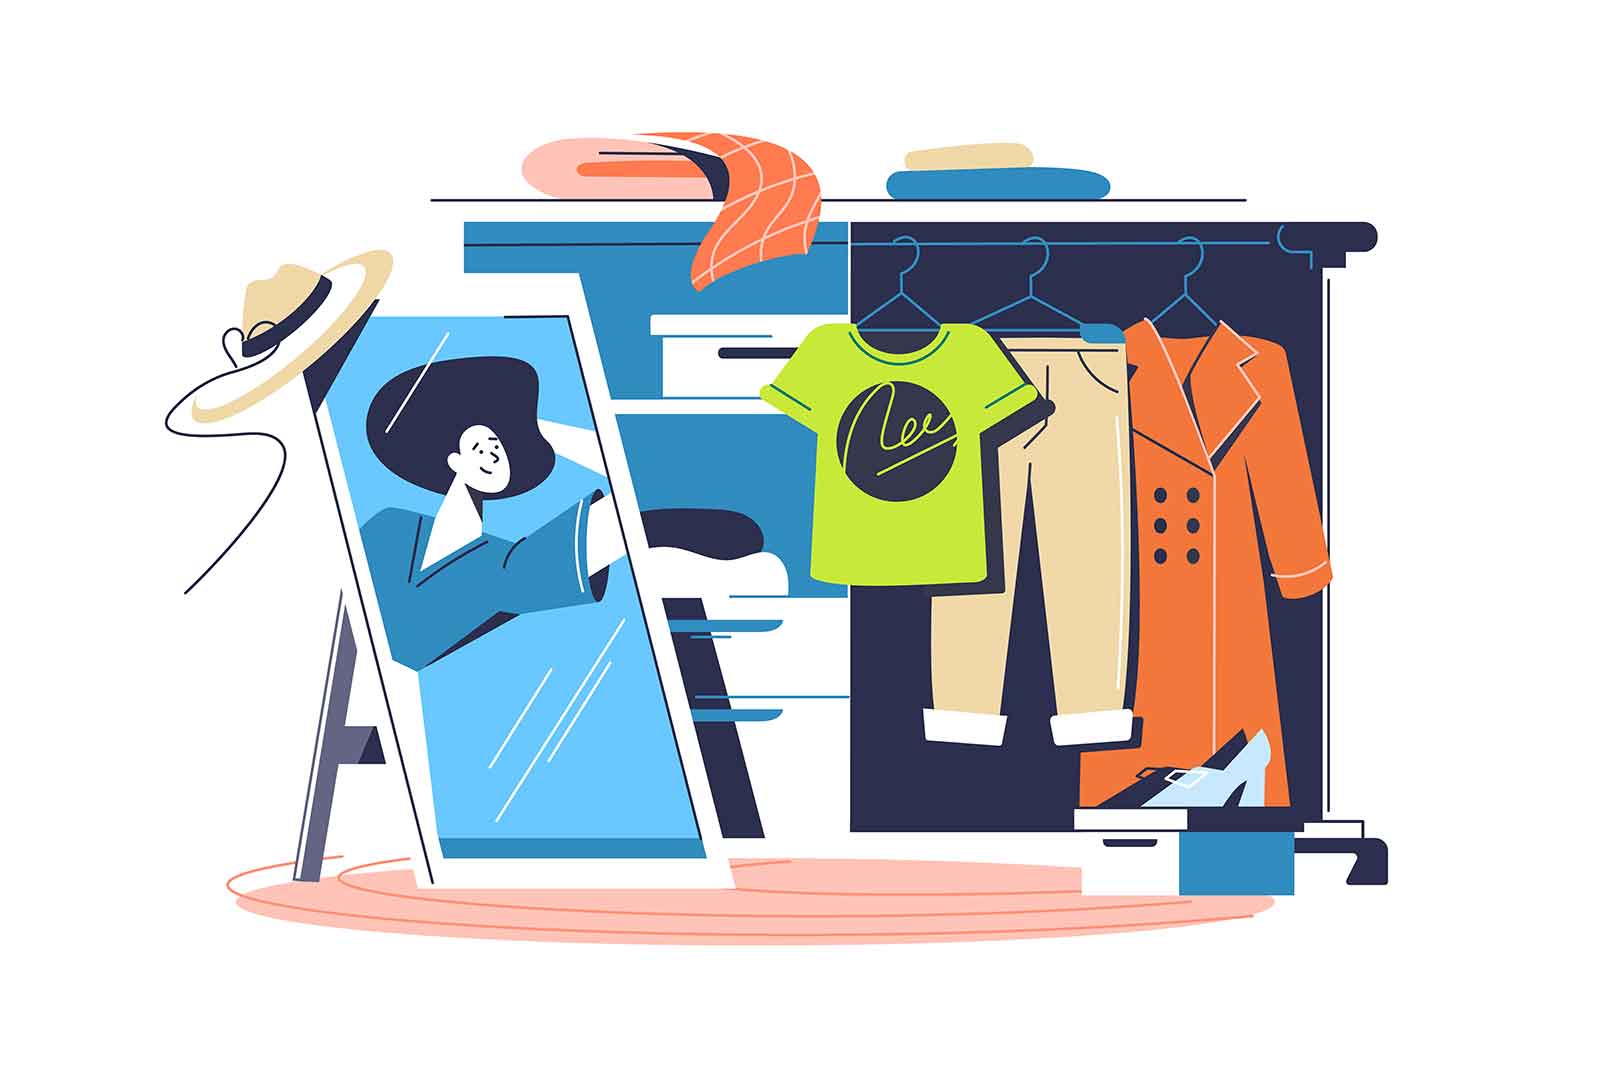 Woman wardrobe with clothing and accessories, vector illustration. A woman tries on a hat in front of a mirror.